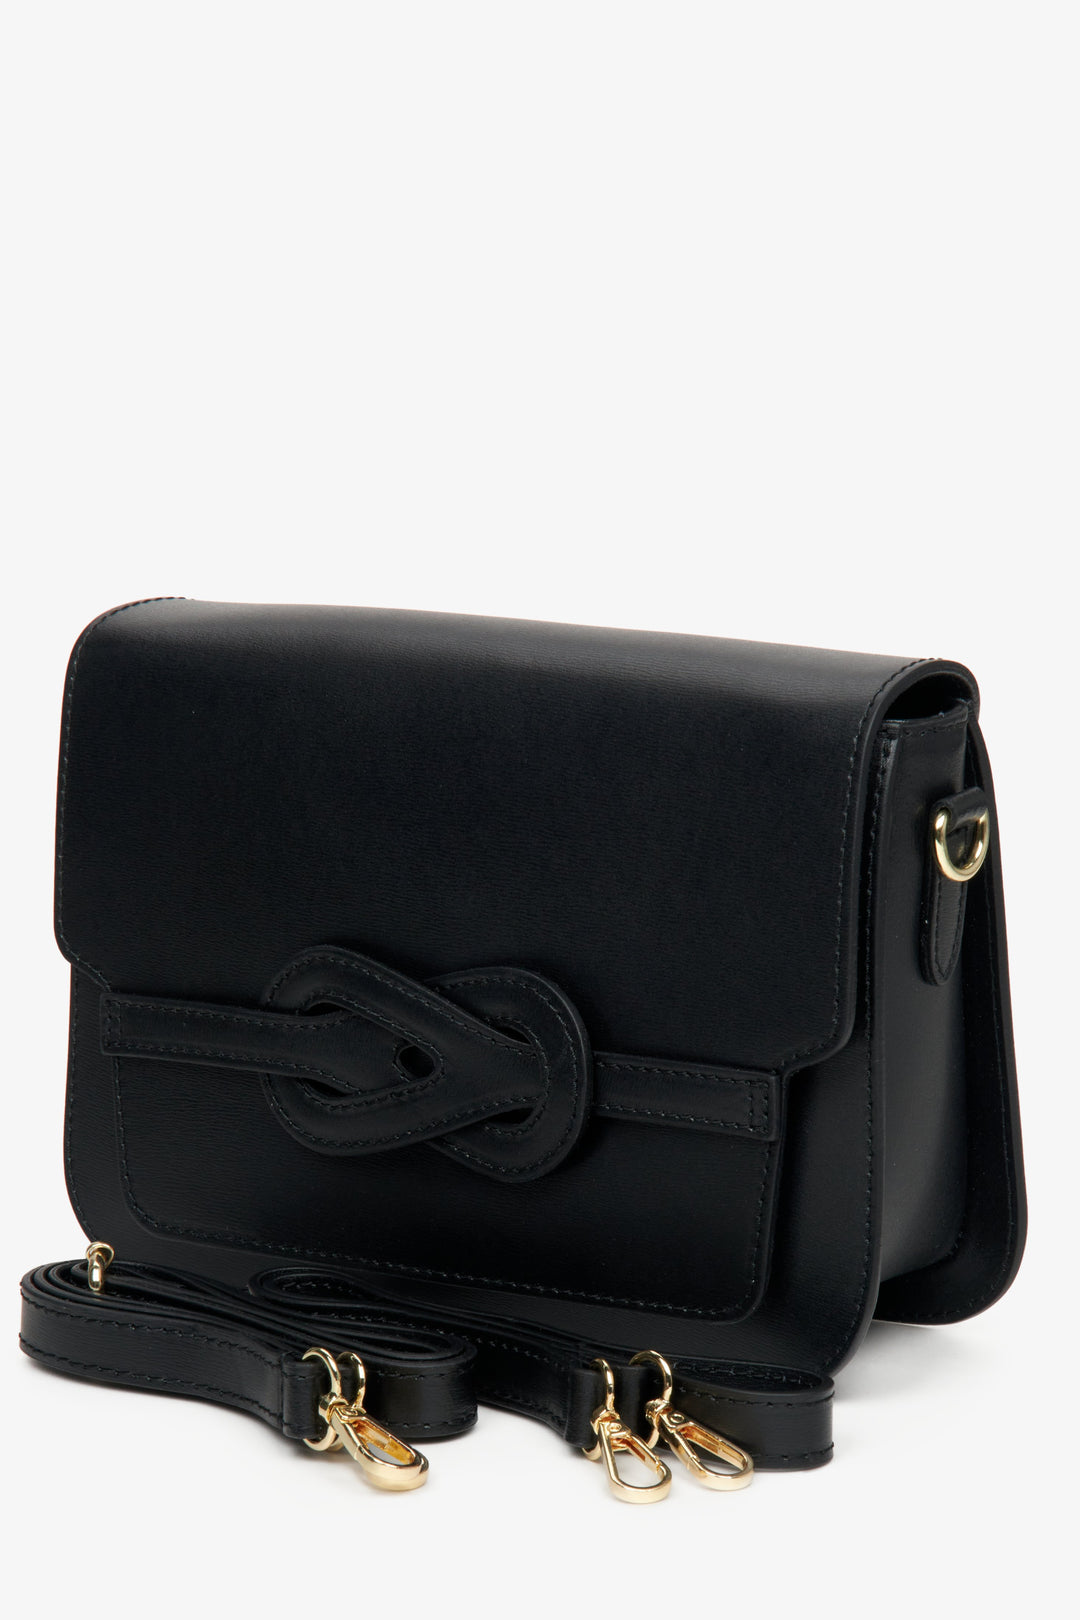 Handbag for women made of natural leather of Italian production - the front part of the model in black.